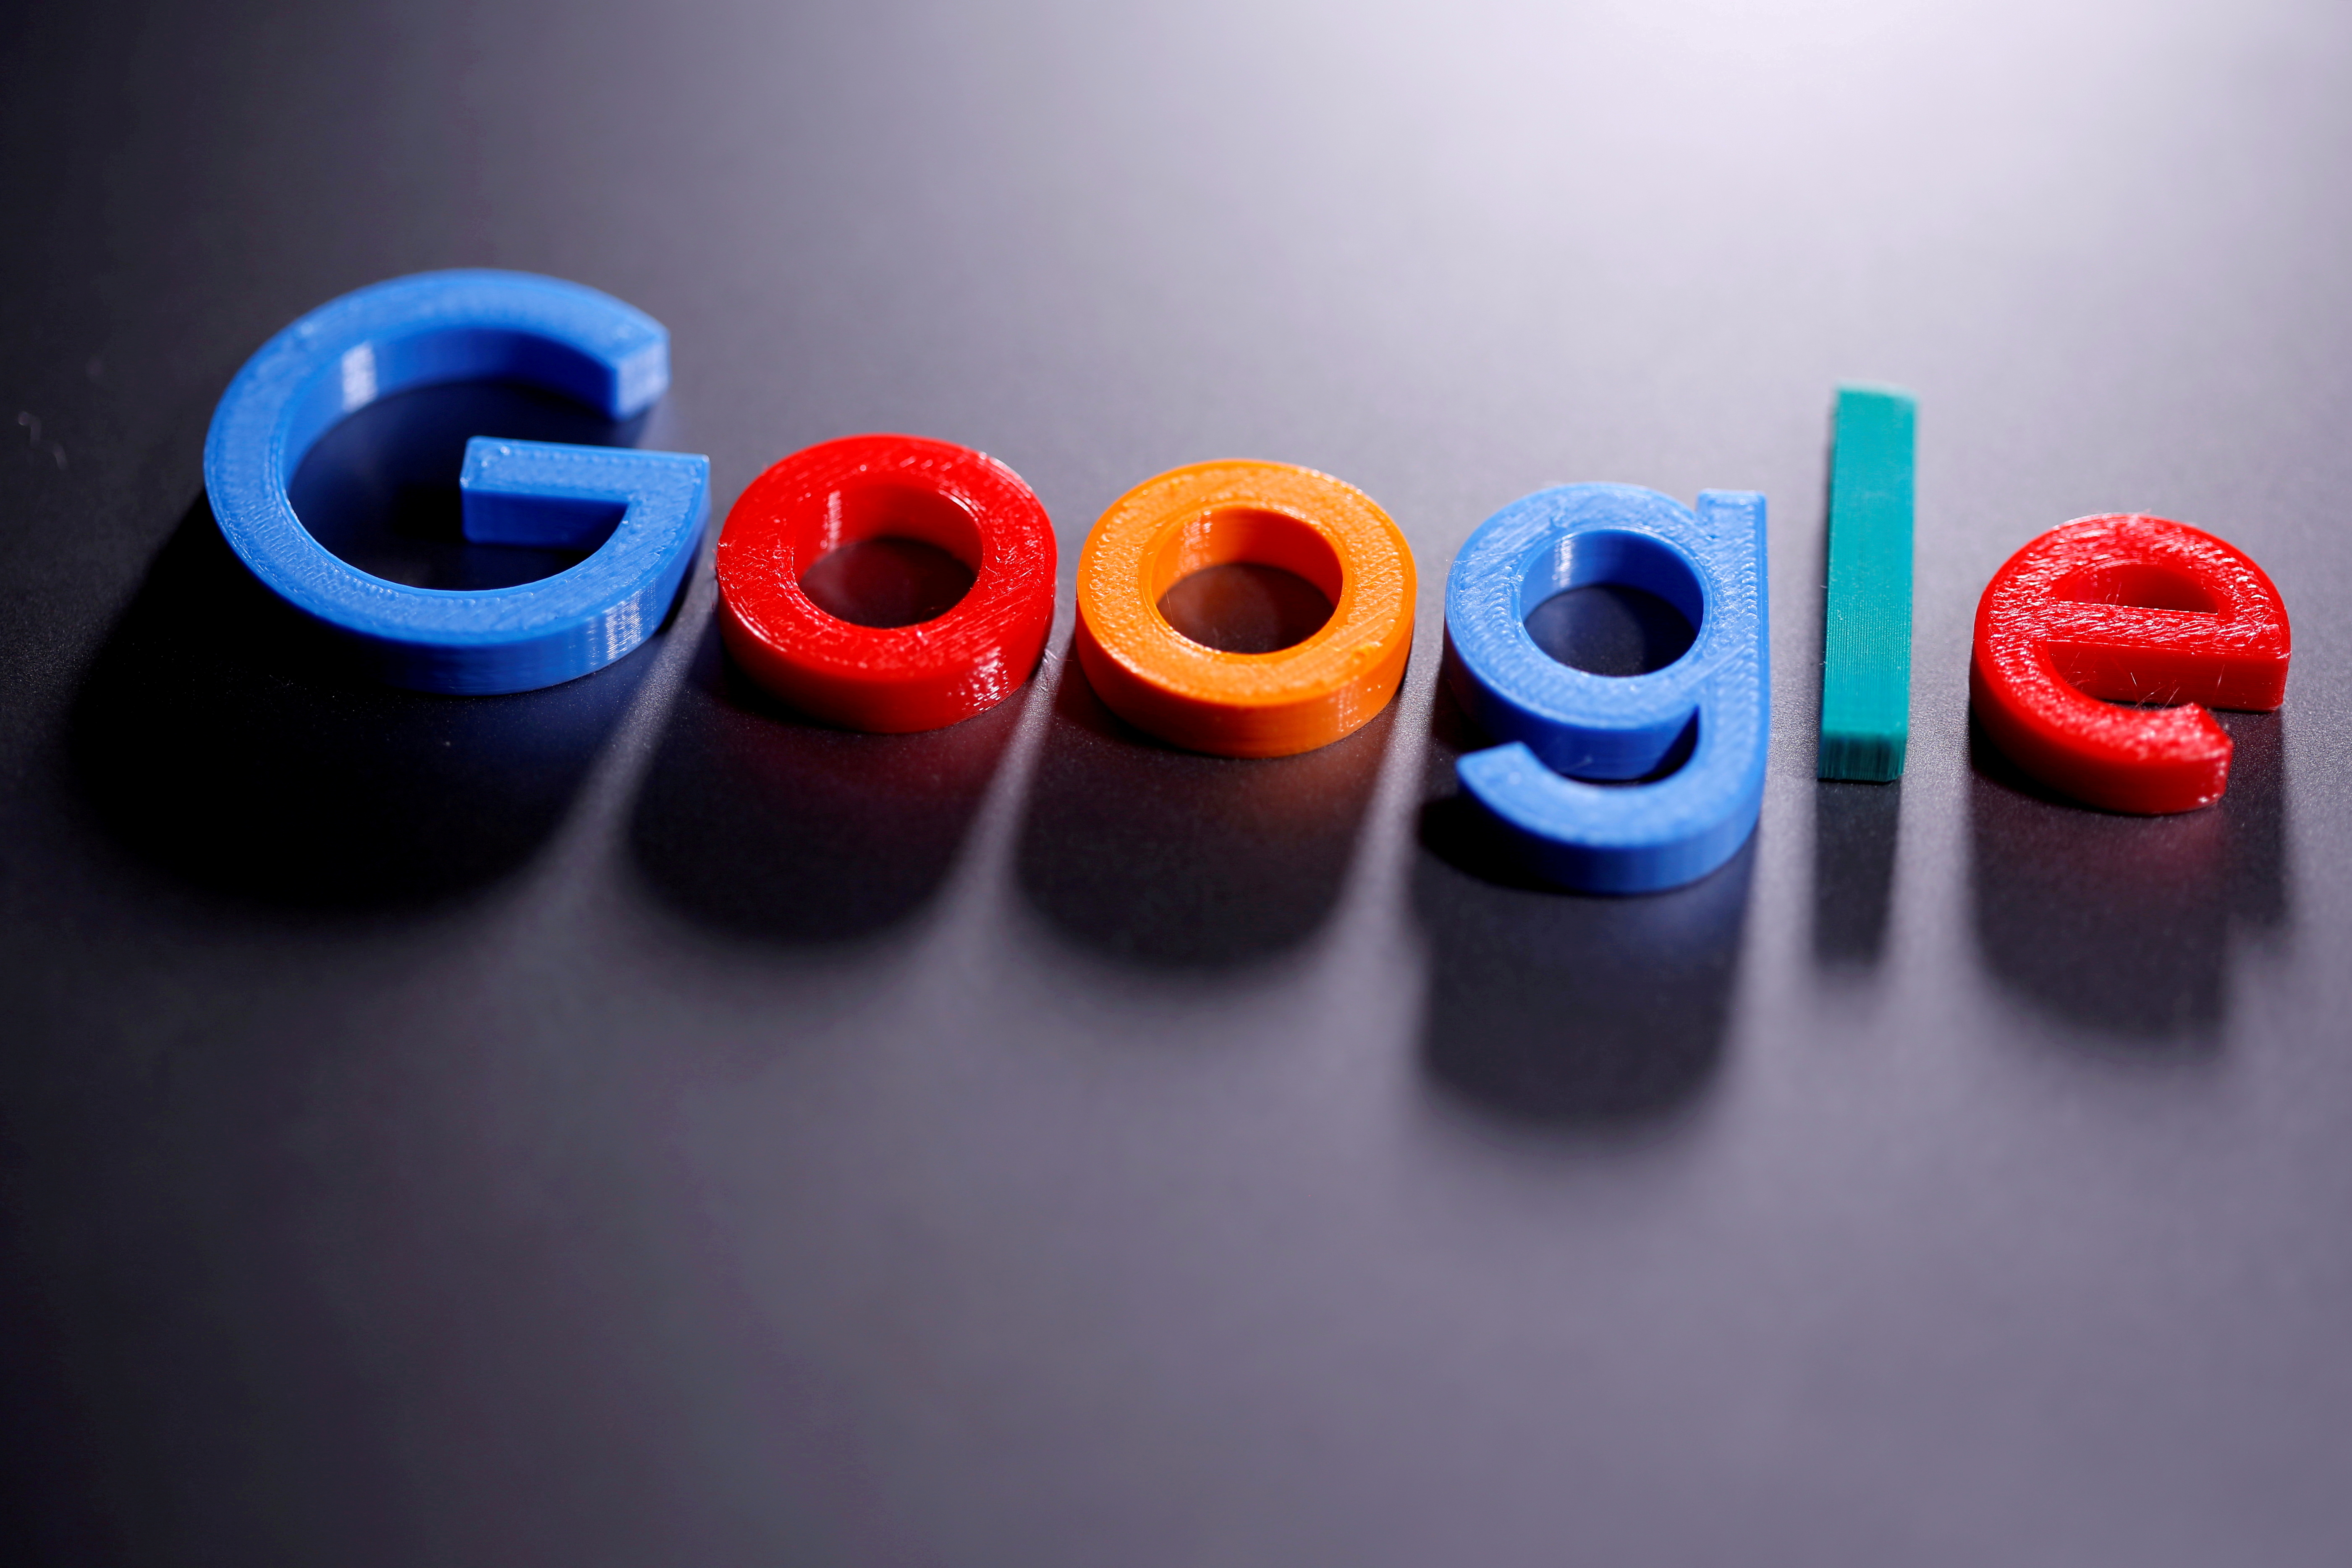 A 3D-printed Google logo is seen in this illustration taken April 12, 2020. REUTERS/Dado Ruvic/Illustration